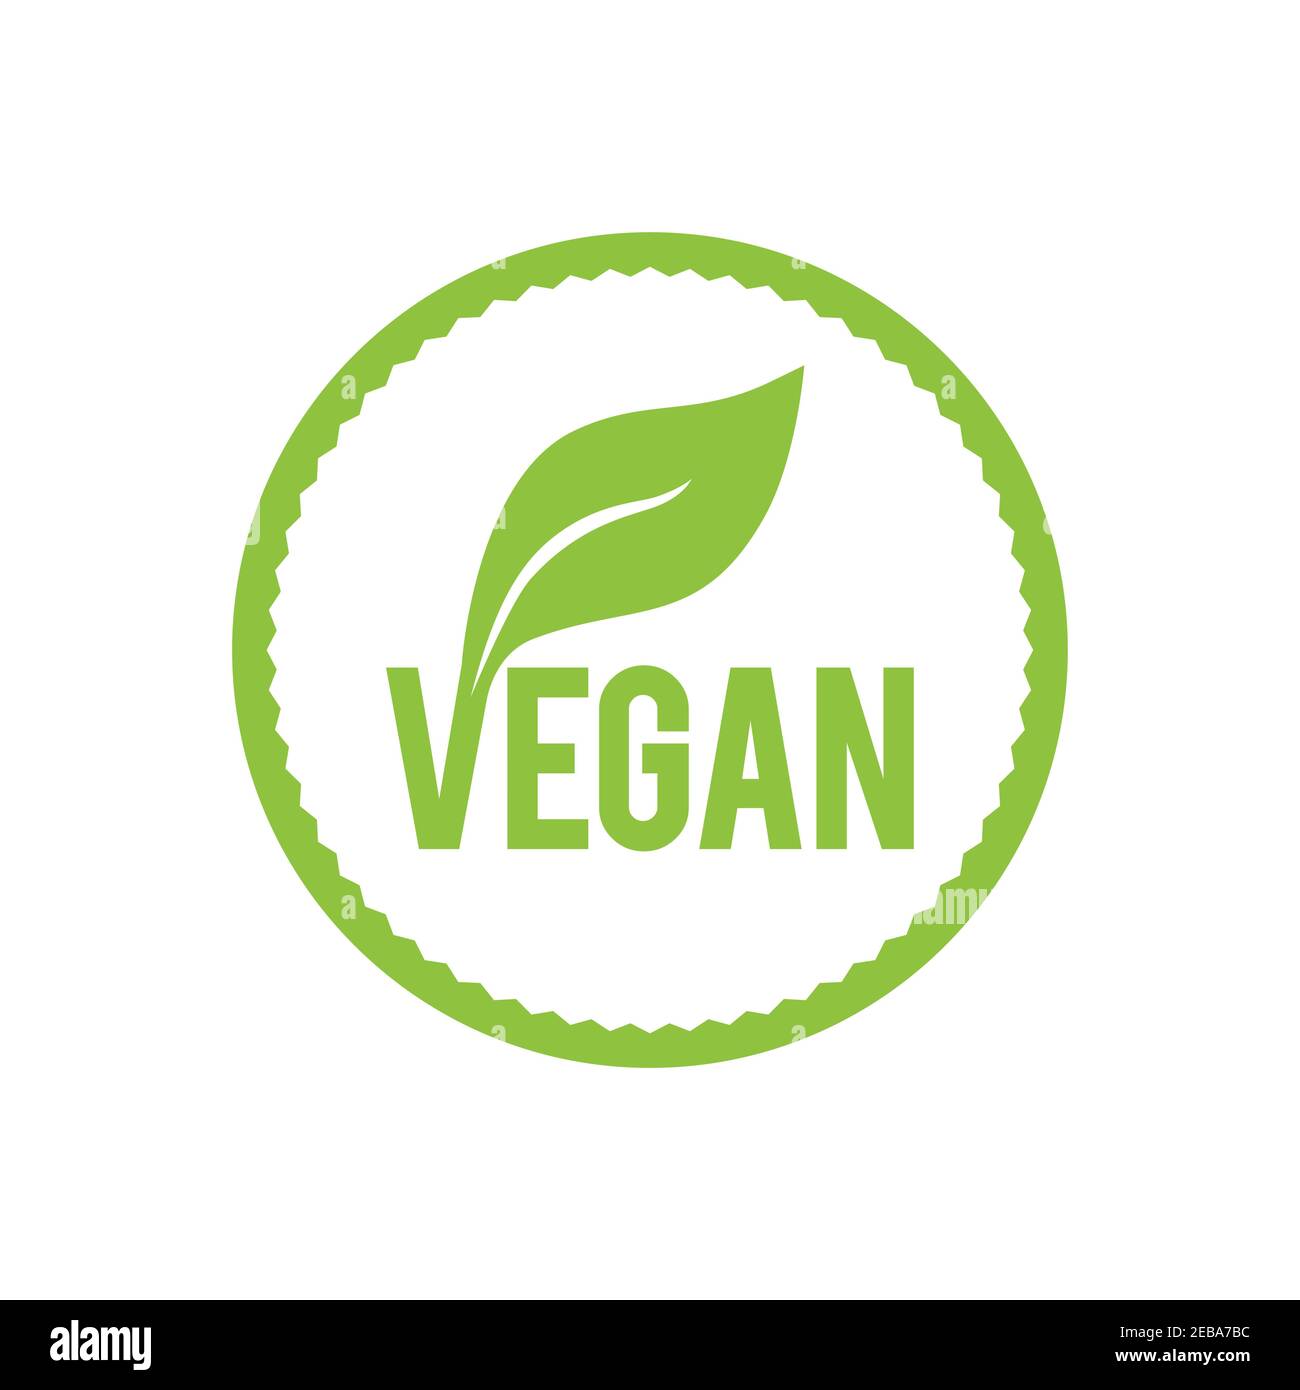 Vegan icon. Round and green. Stock Vector